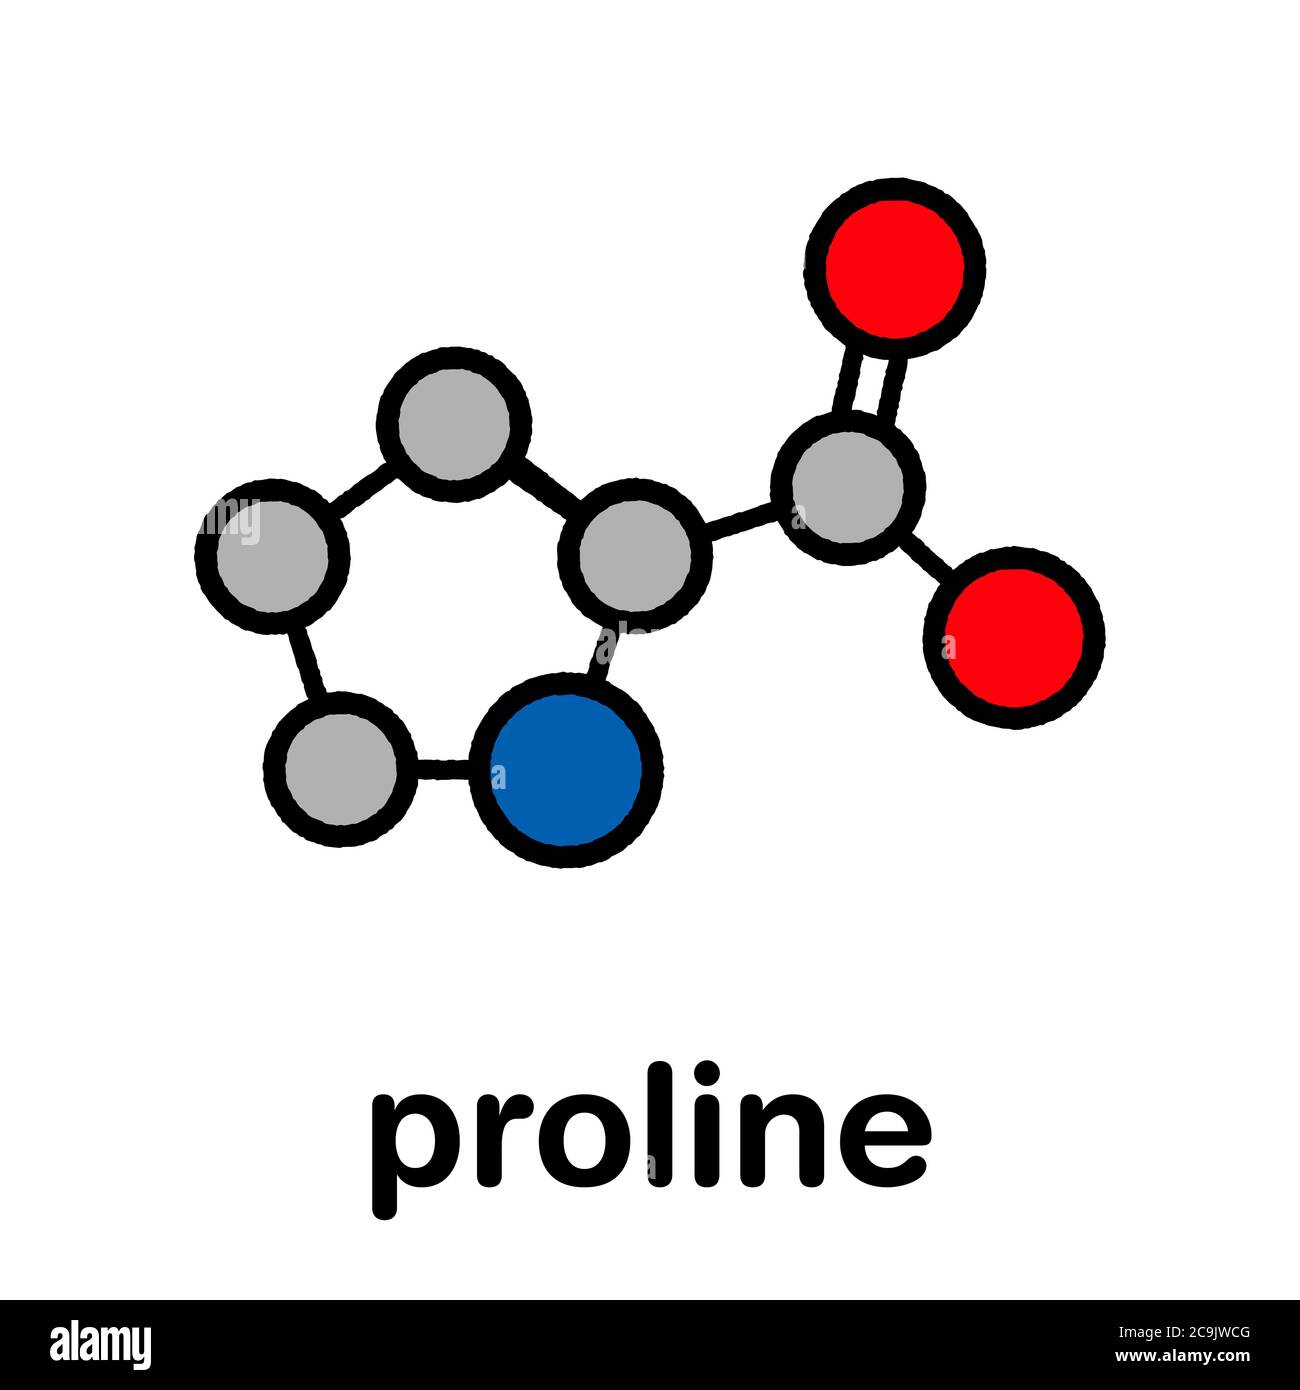 Proline (l-proline, Pro) amino acid molecule. Stylized skeletal formula (chemical structure). Atoms are shown as color-coded circles with thick black Stock Photo